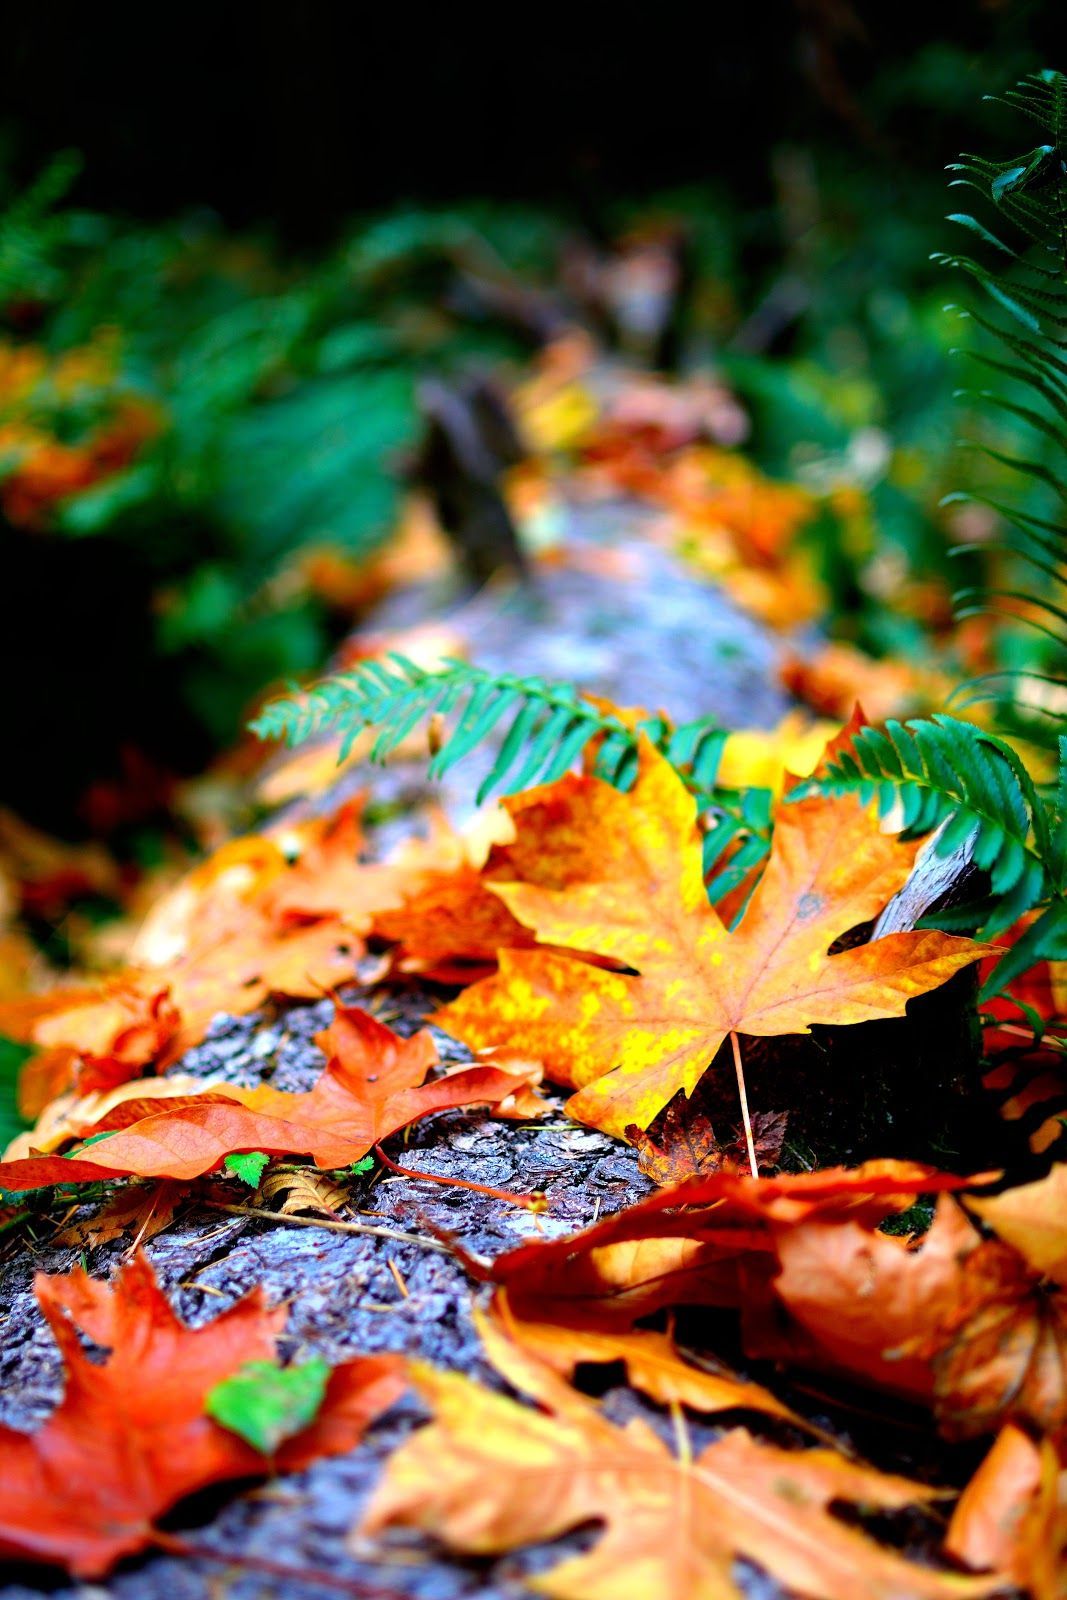 4k Wallpaper Autumn Leaves Blur Close Up Photo of Dry Leavesk